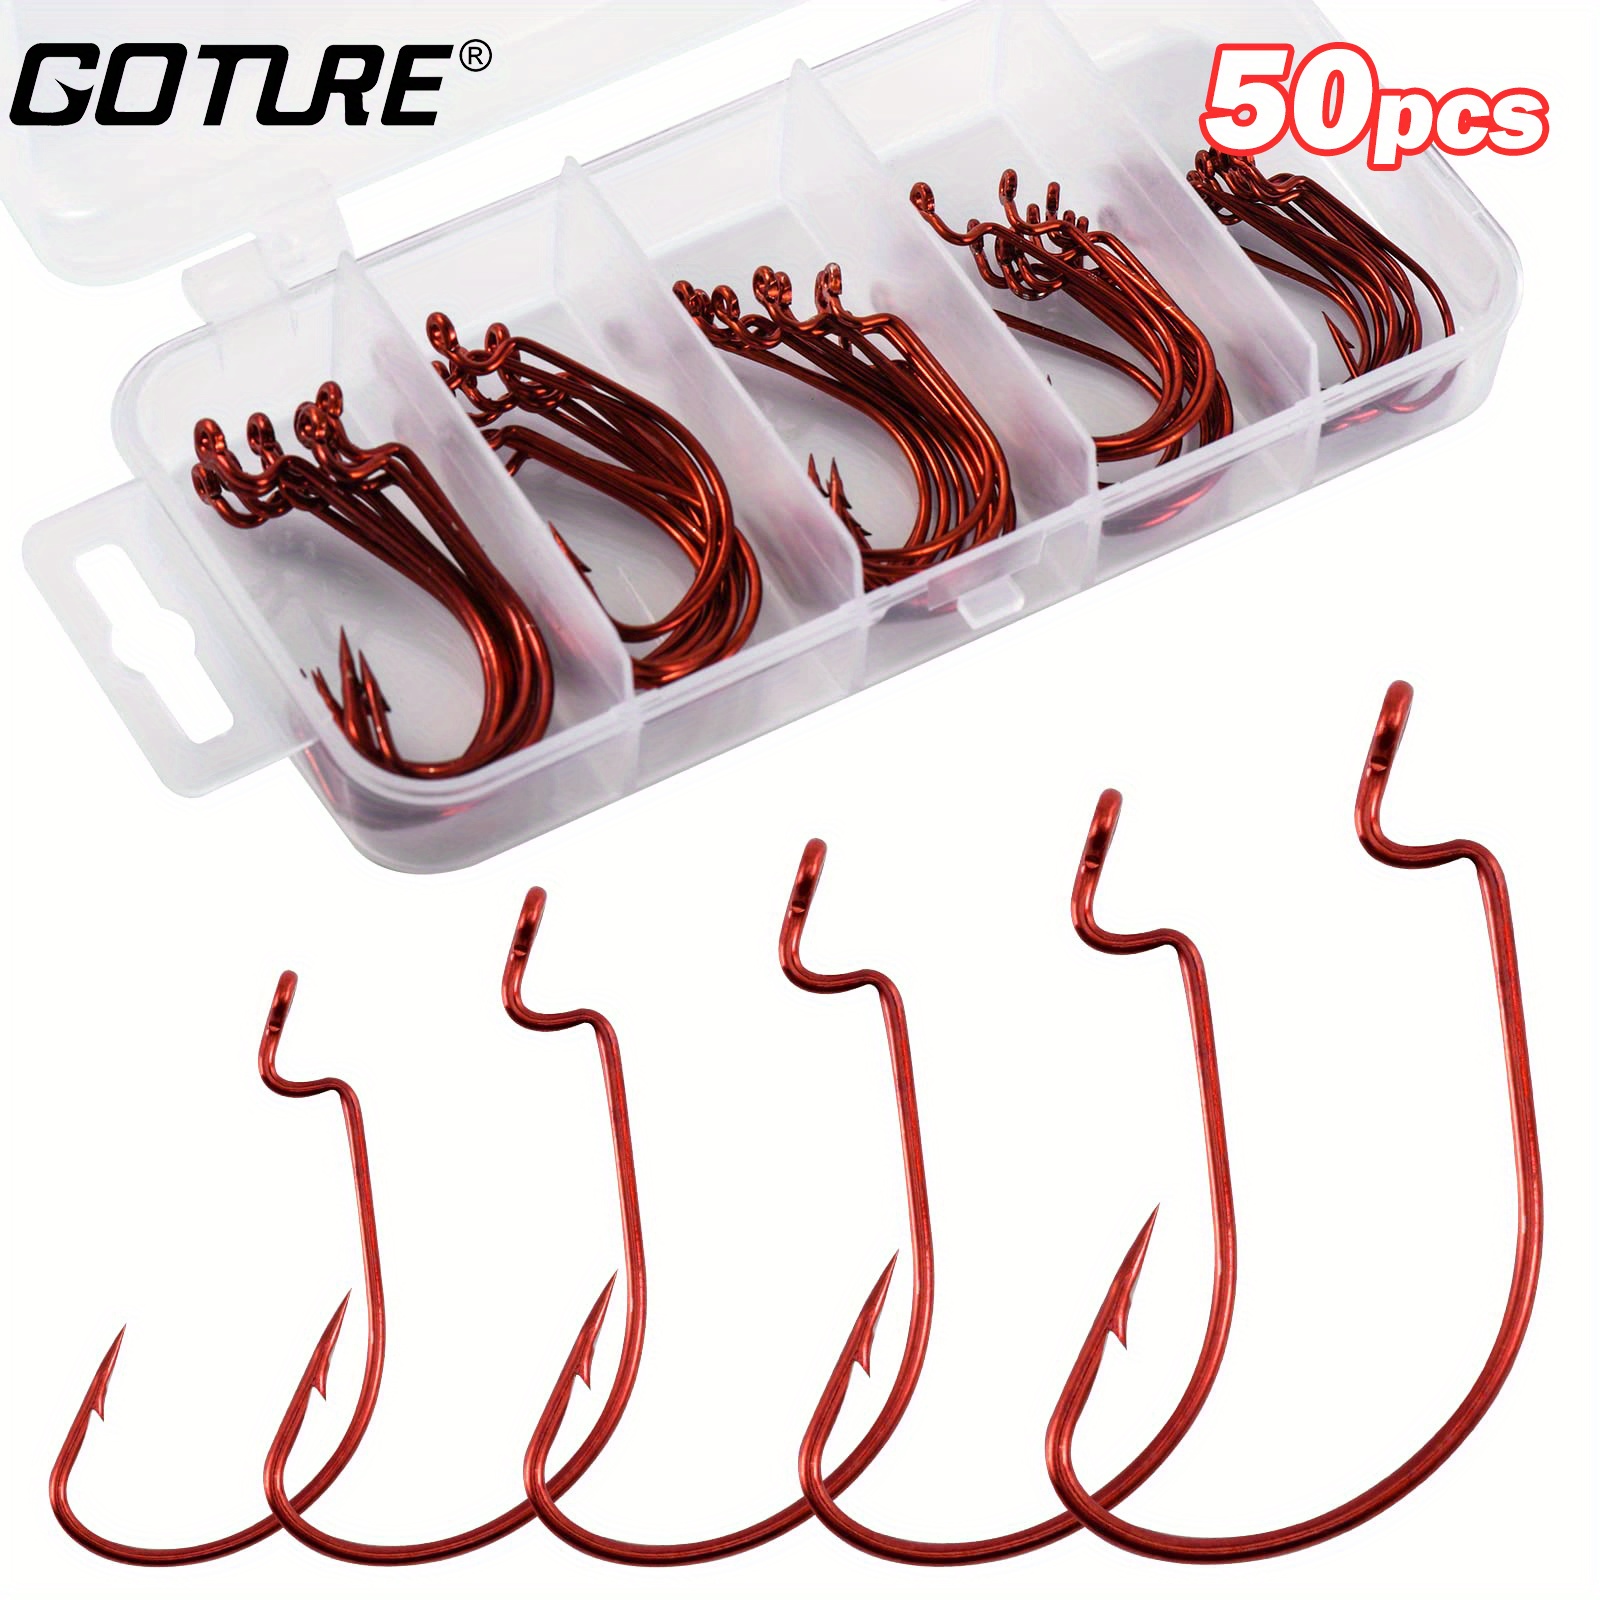 30pcs Golden Fishing Hooks, High-Carbon Steel Barbed Fishing Hook, Classic  Fine Wire Point Bent Hook, Suitable For Small Fish